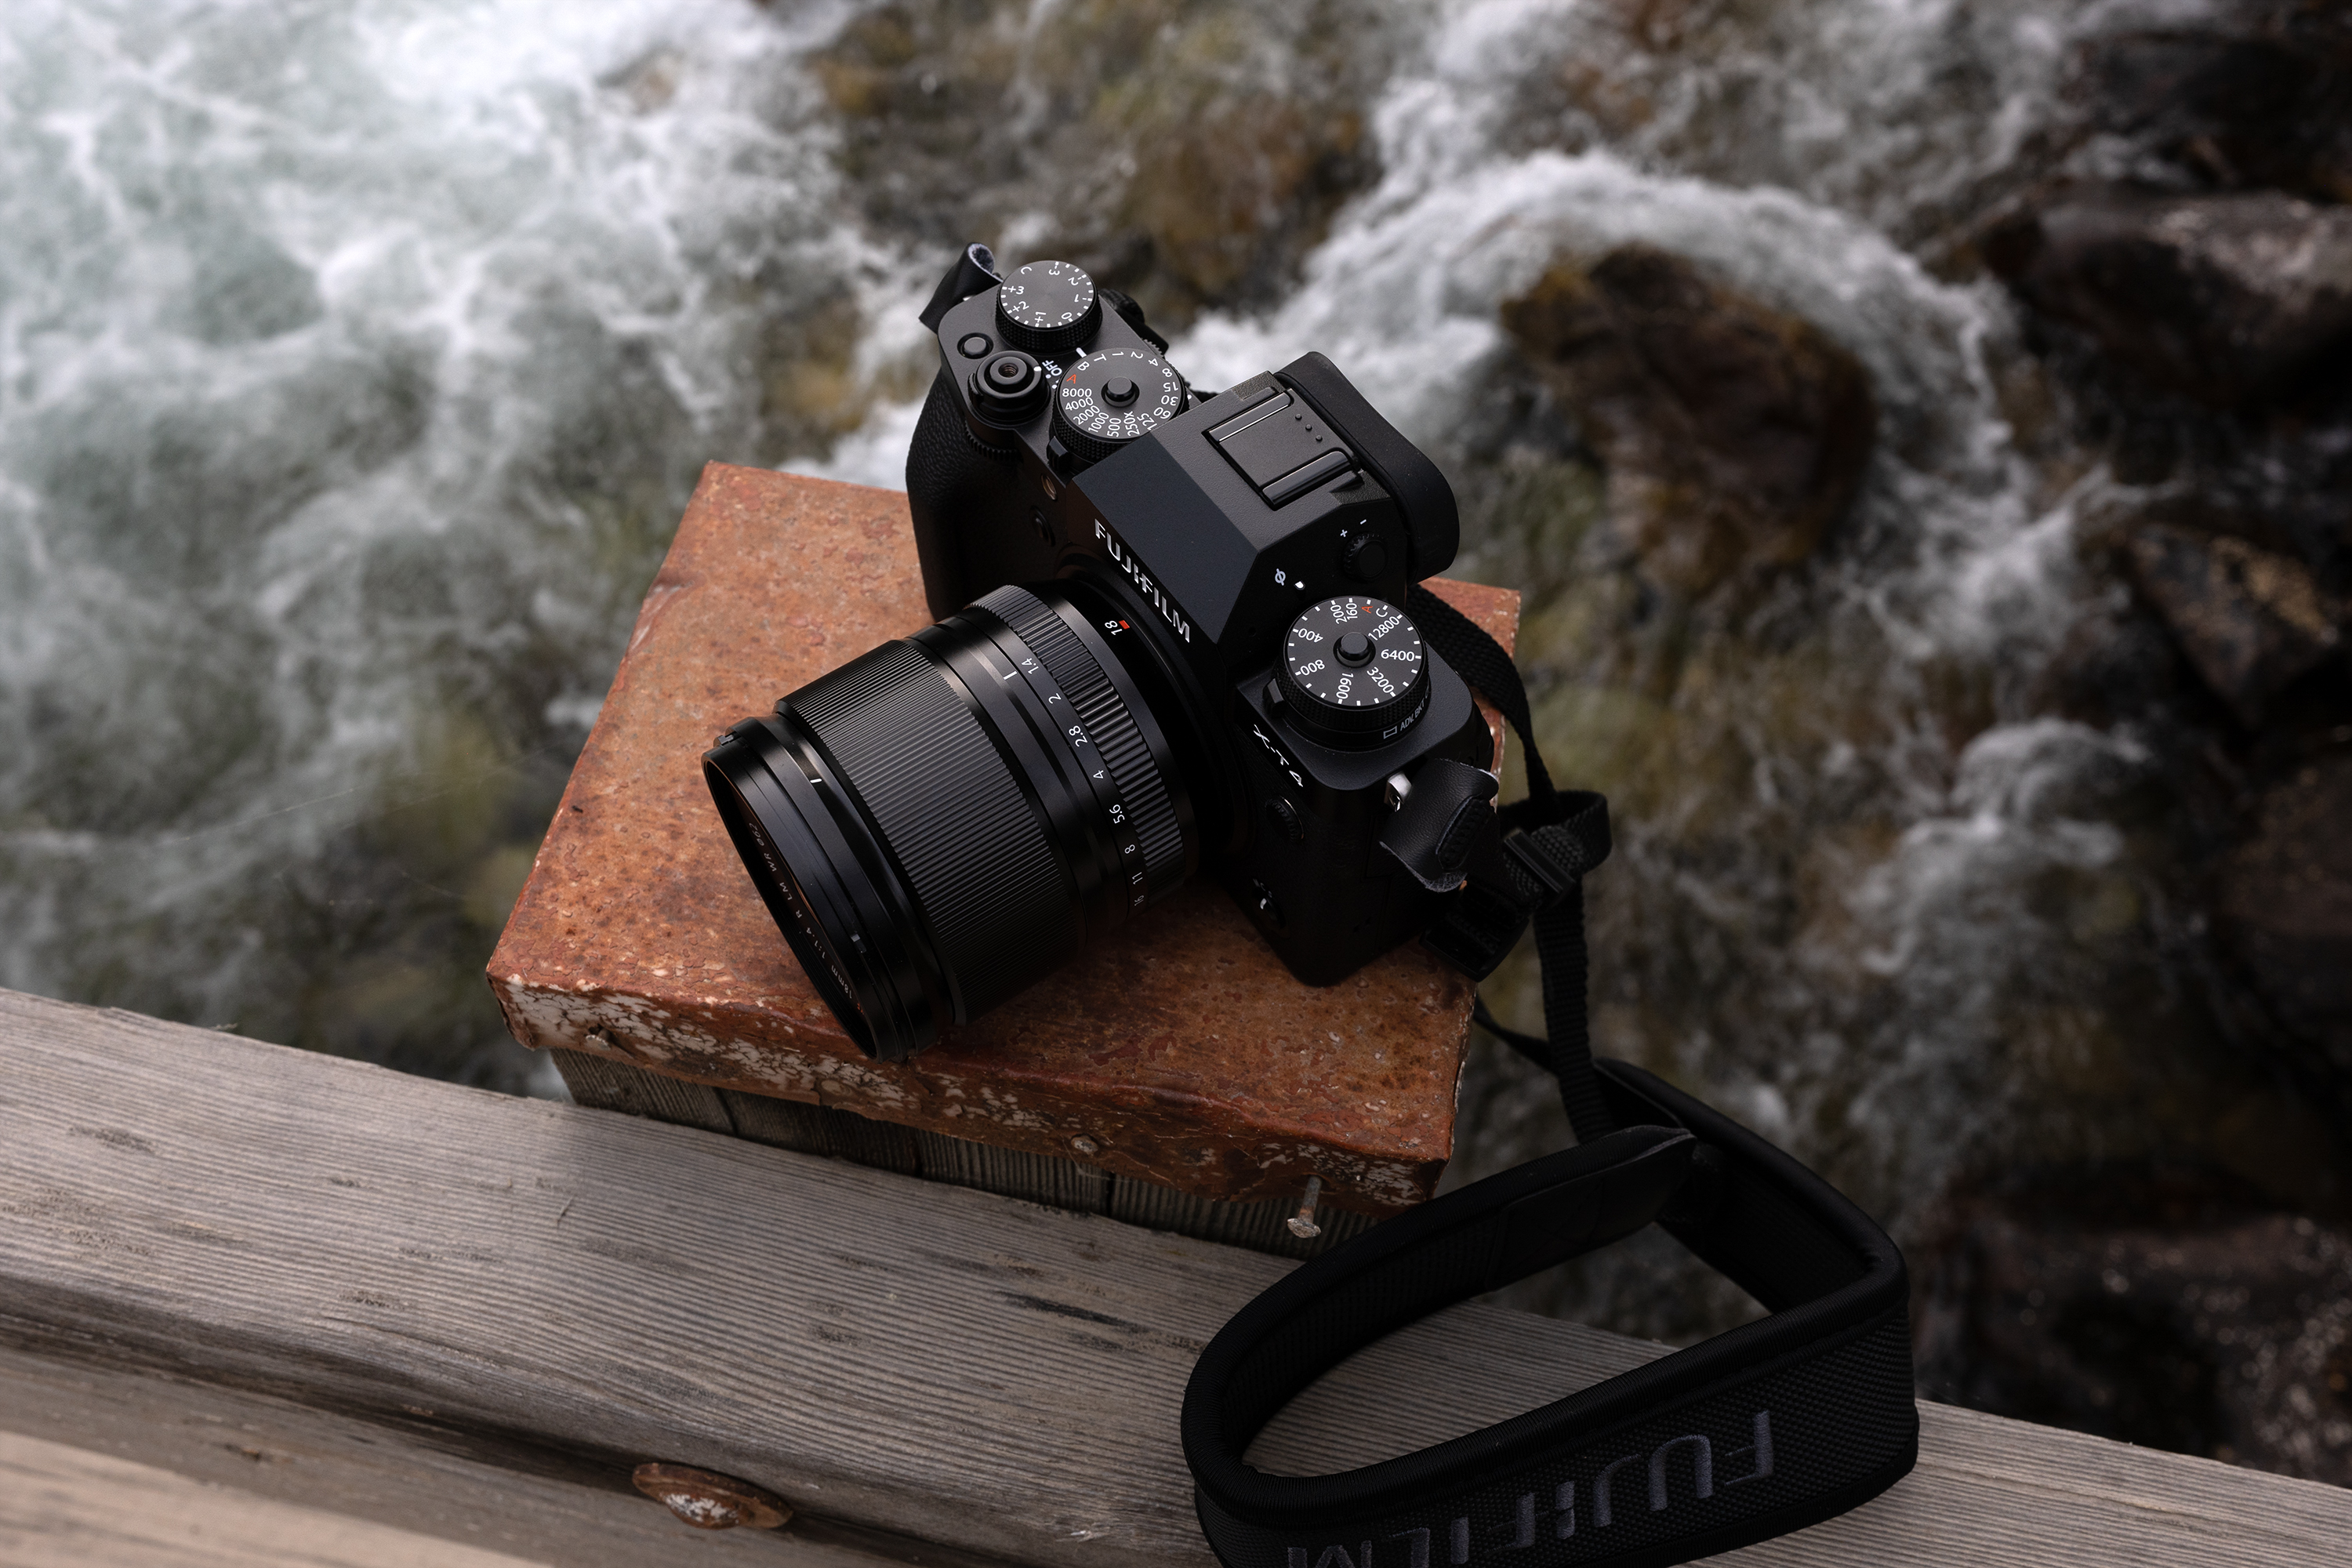 Fujifilm XF 18mm F/1.4 R LM WR Review: A fun but flawed fast prime